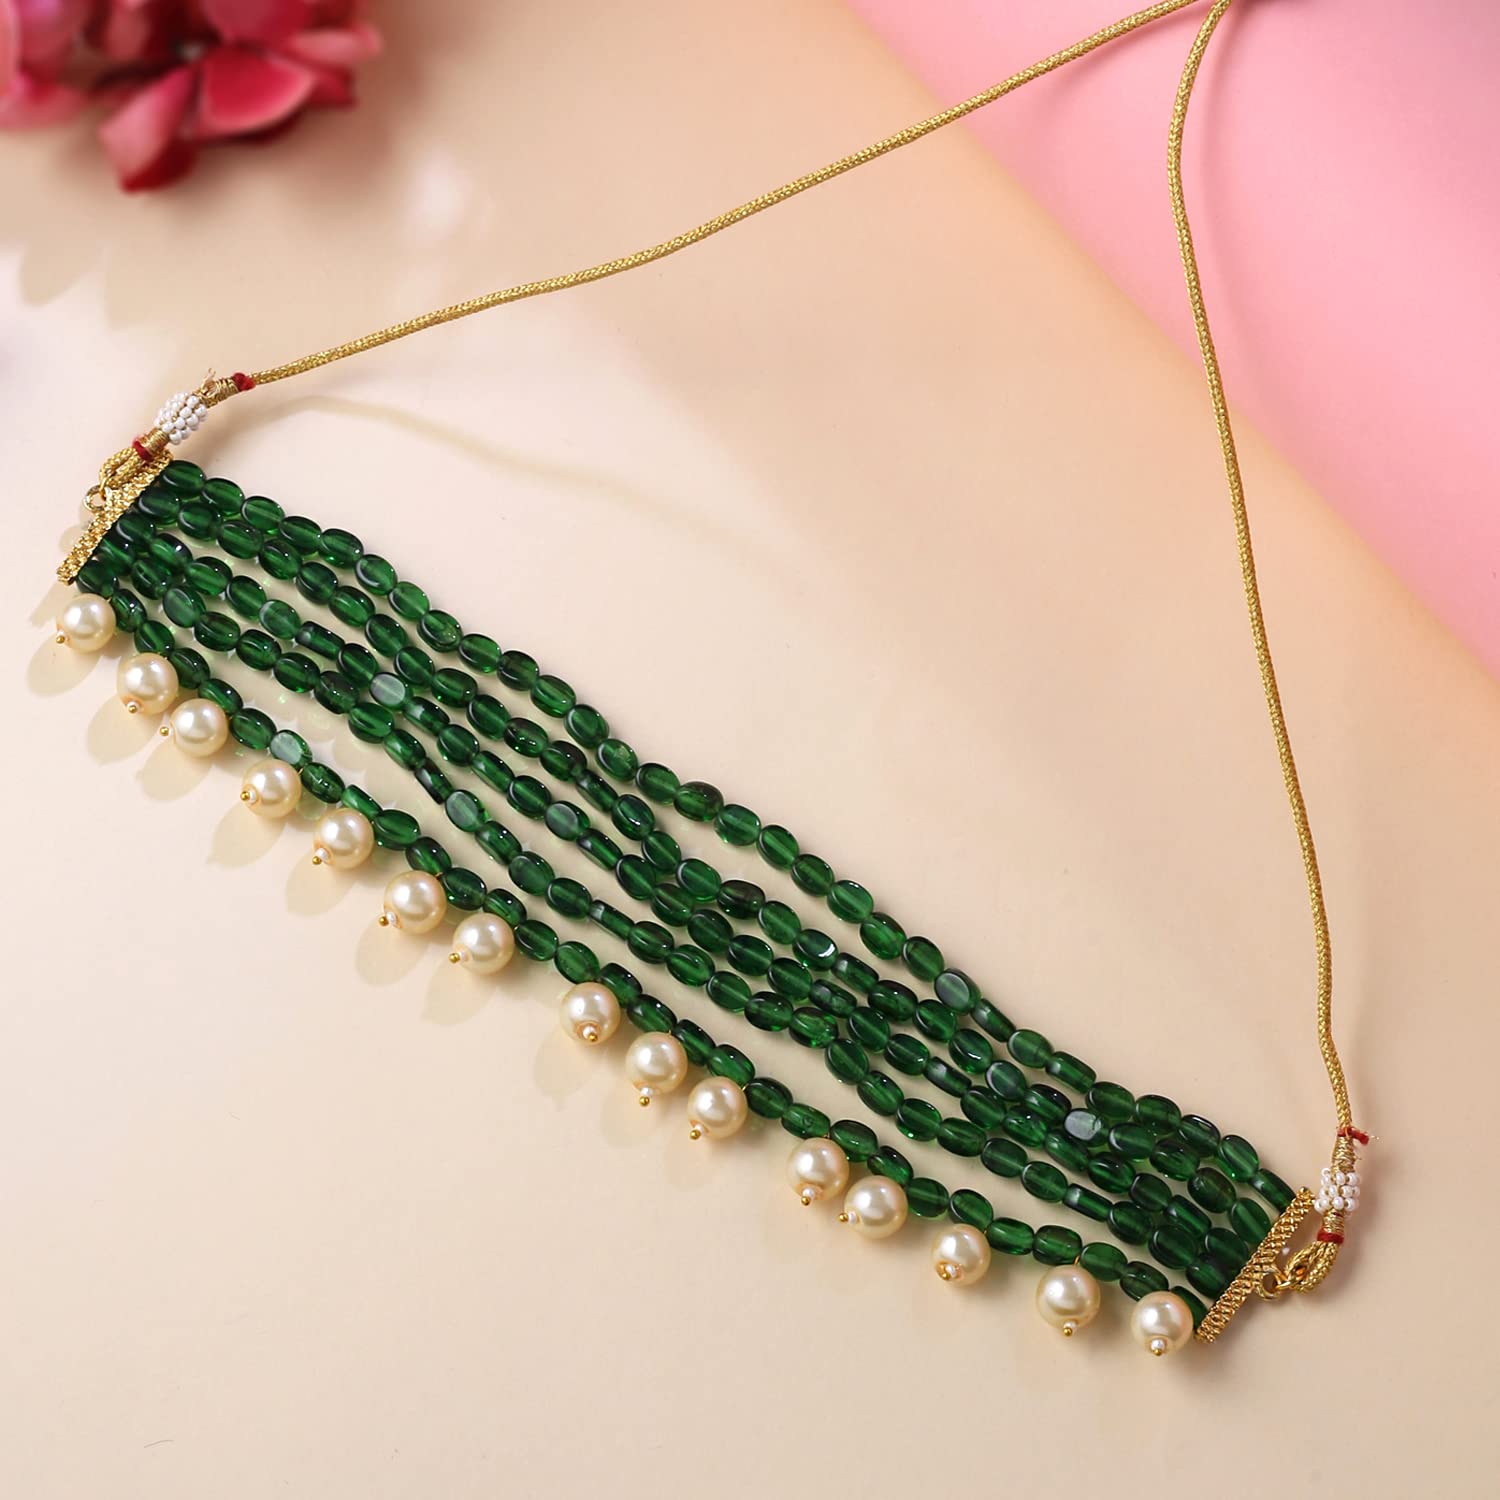 Yellow Chimes Necklace for Women and Girls Beads Necklace for Women | Multilayer Green Beads Choker Necklace | Birthday Gift for girls and women Anniversary Gift for Wife